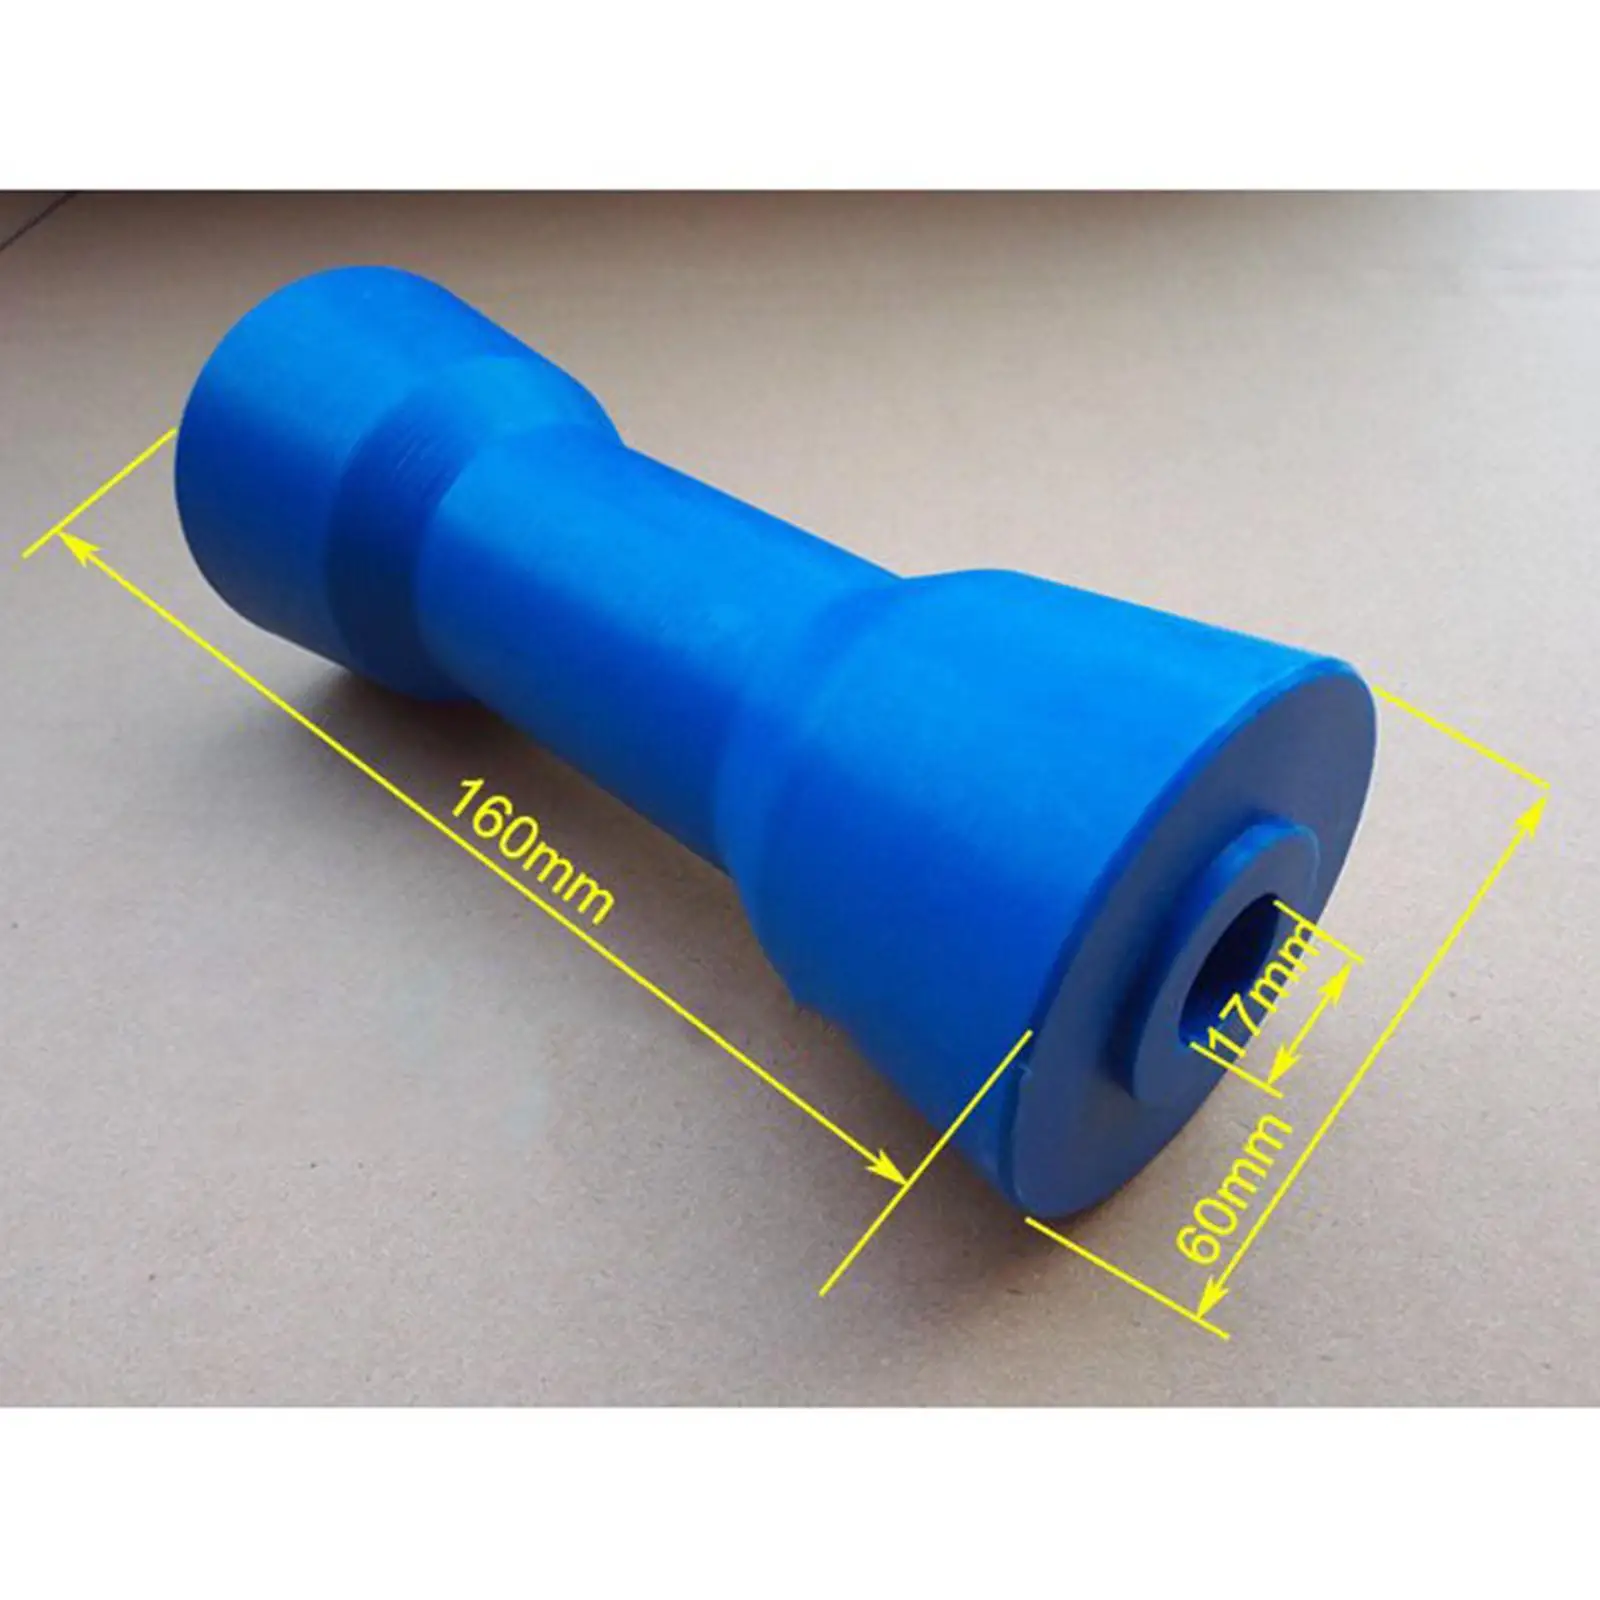 Heavy Duty Trailer Keel Roller Replacement 160mm 17mm Bore Bow Roller for Boat